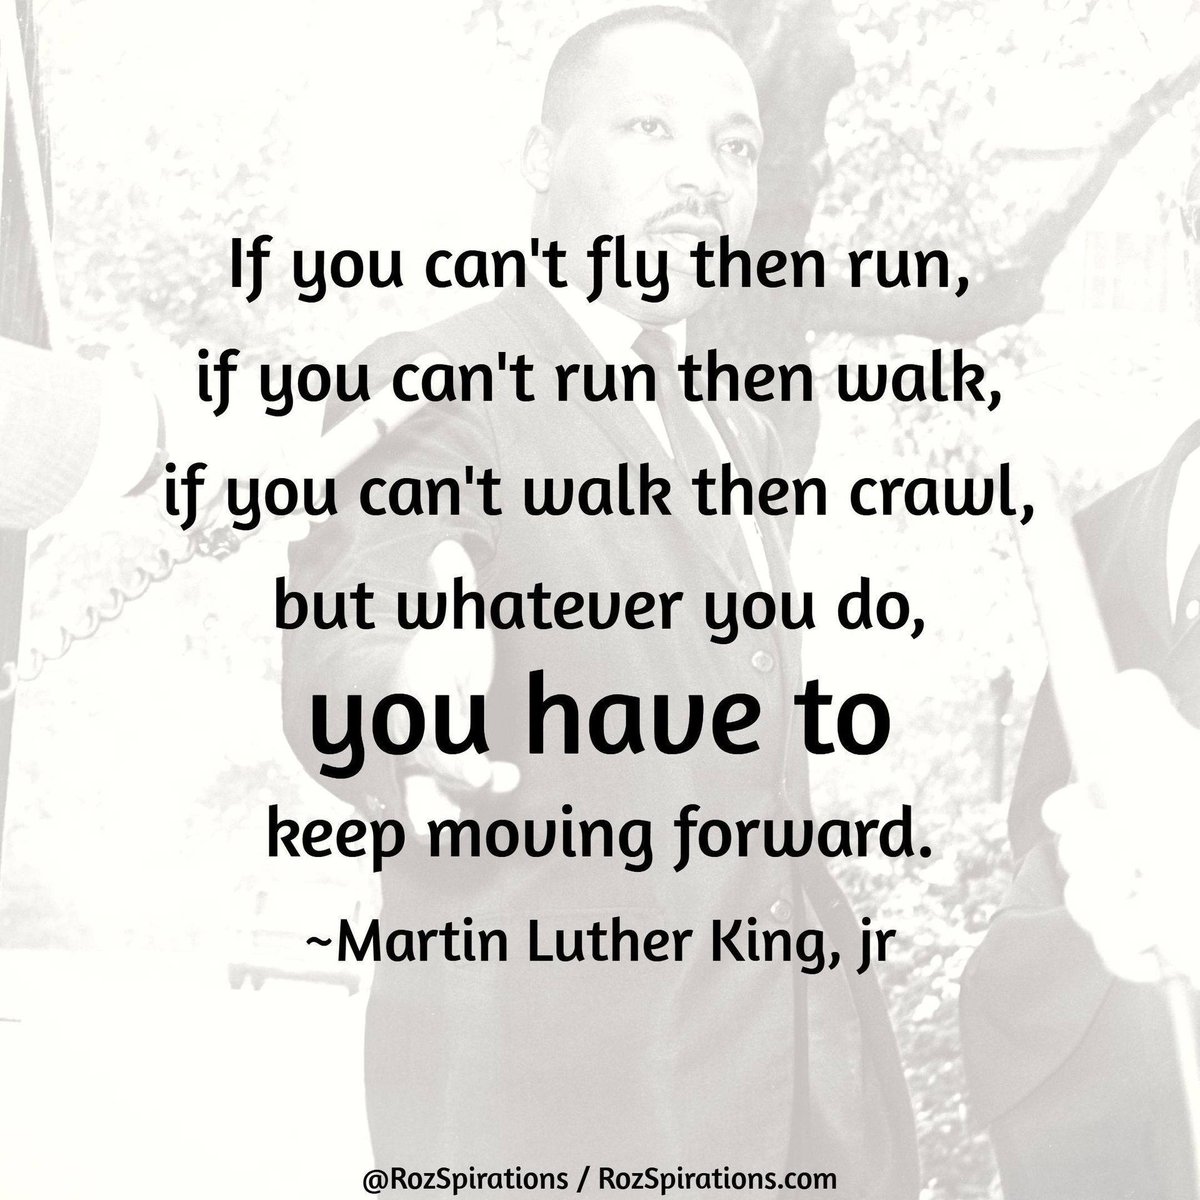 If you can't fly then run, if you can't run then walk, if you can't walk then crawl, but whatever you do, YOU HAVE TO keep moving forward! ~Martin Luther King, jr.

#RozSpirations #JoyTrain #LoveTrain #SuccessTrain #MartinLutherKing #MartinLutherKindJR